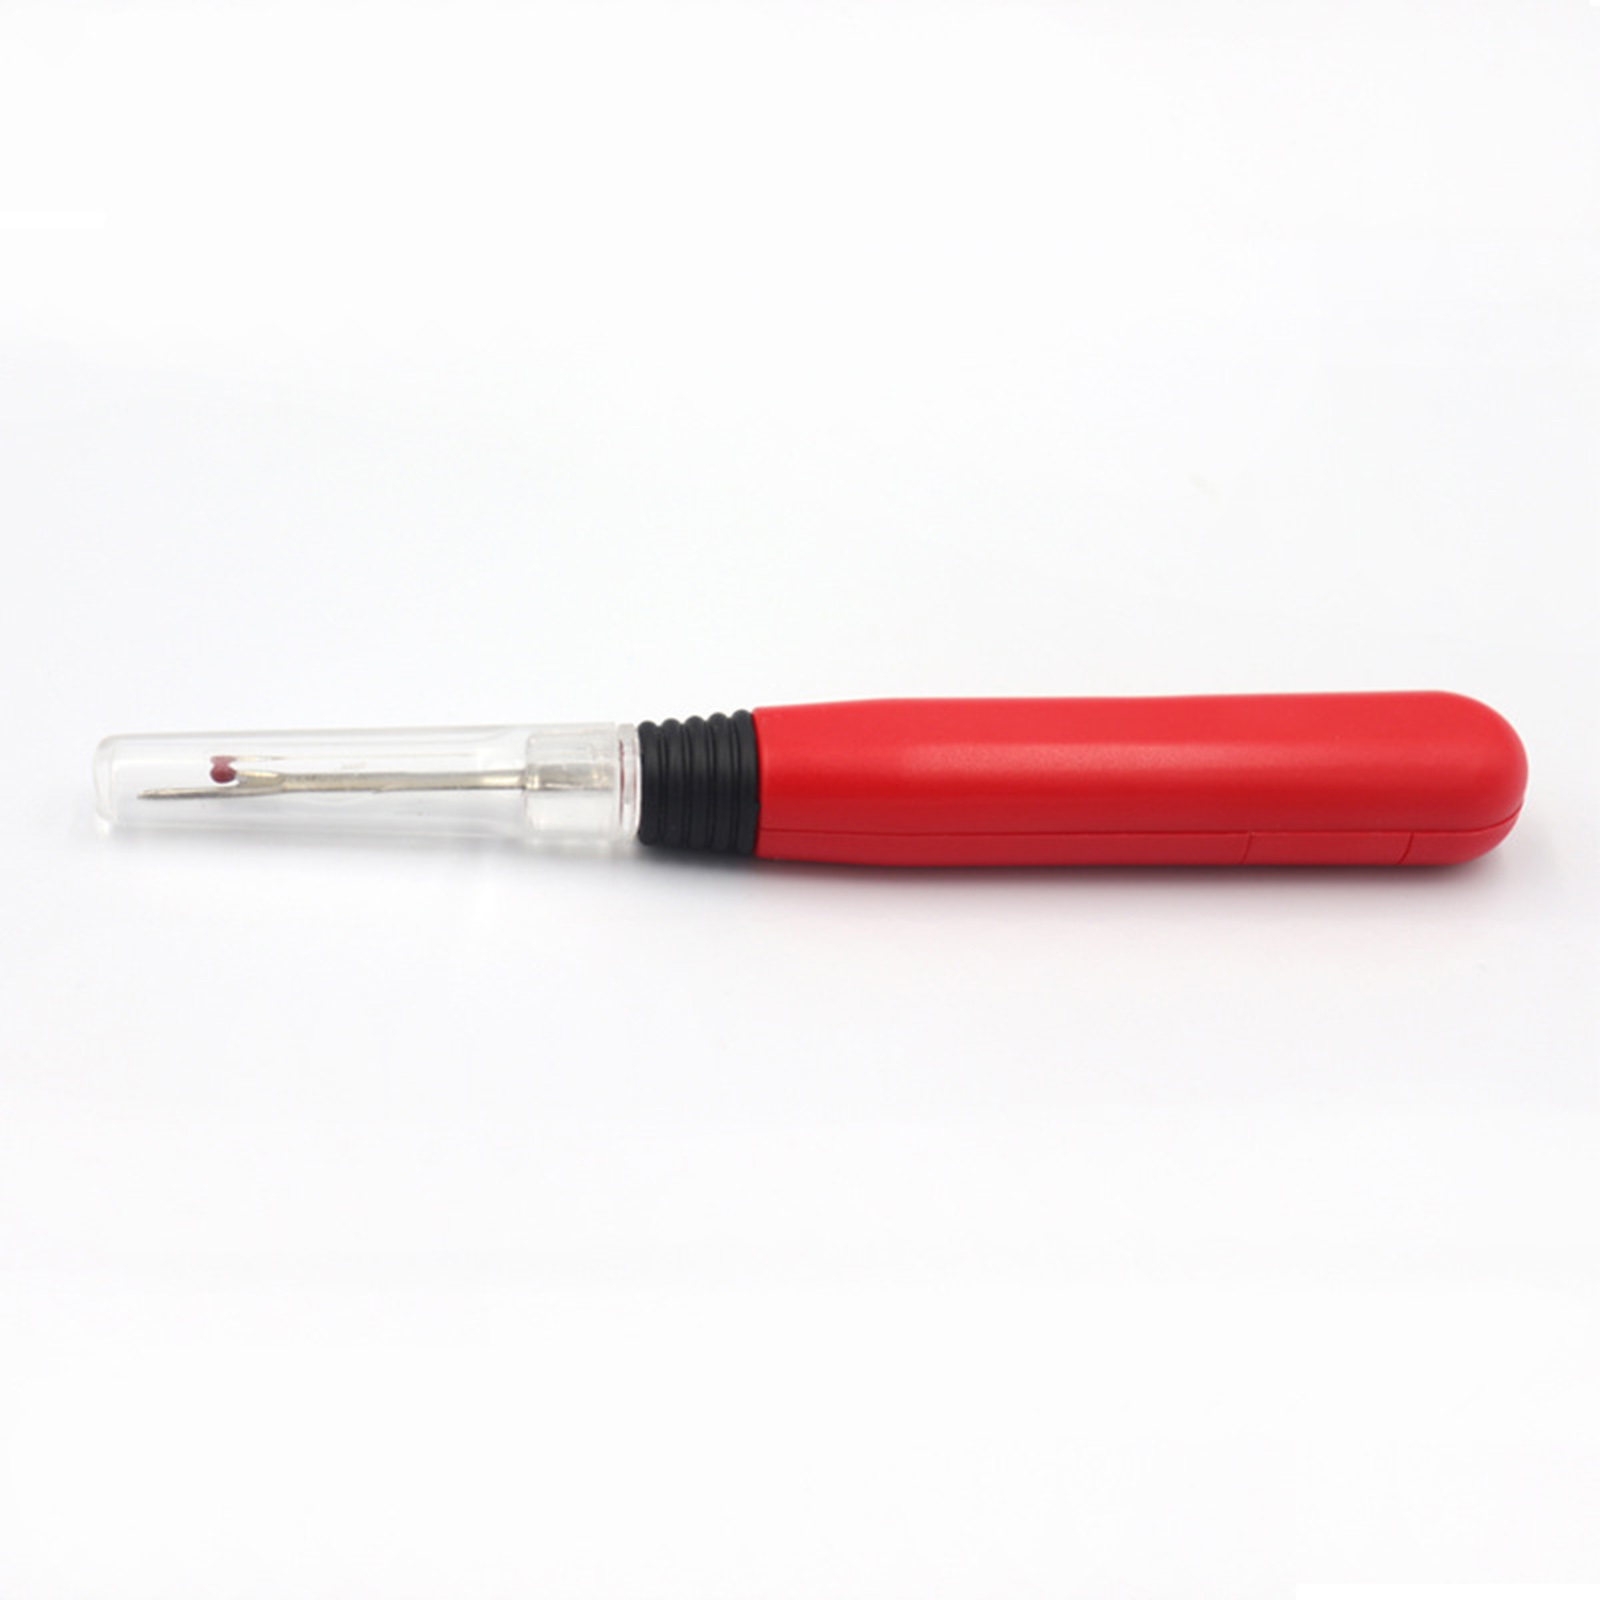 2pieces Lighted Seam Ripper Thread Remover with LED Light Opening Hems DIY, Size: 14x2cm, Red